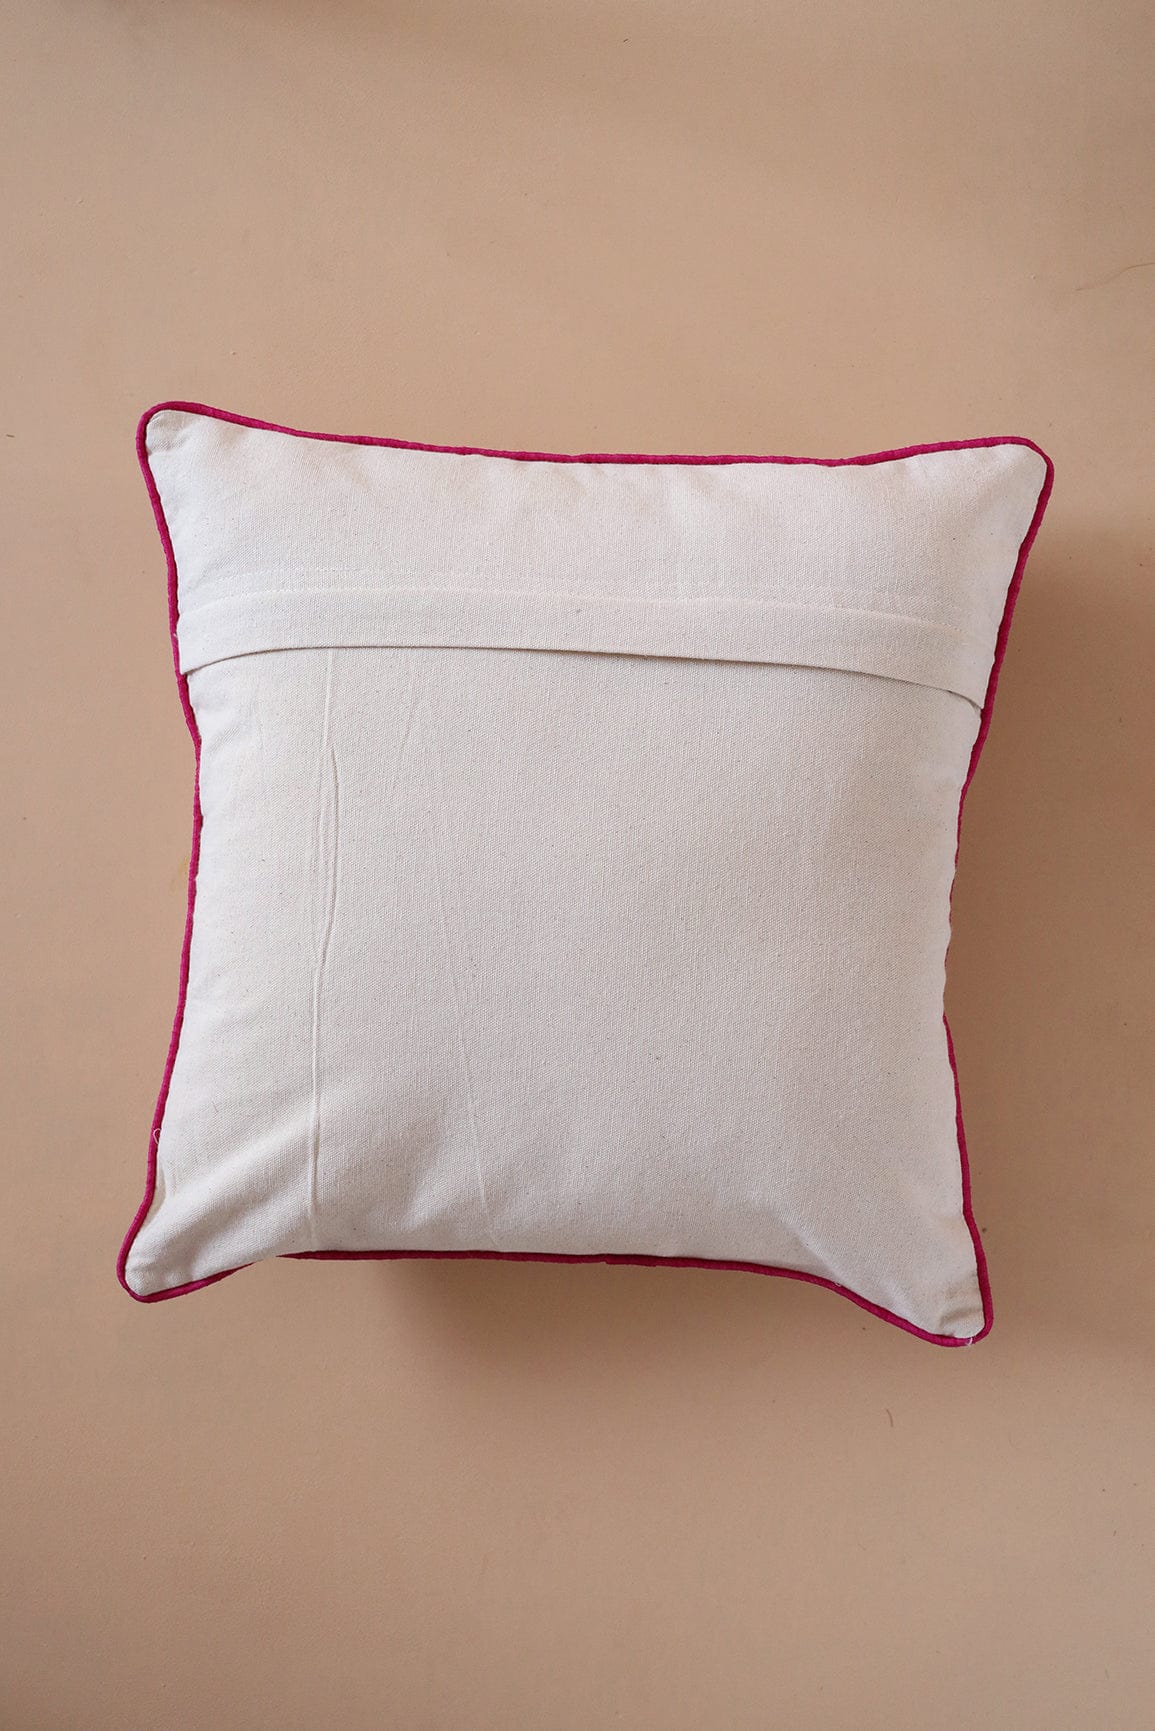 doeraa Pink Floral Embroidery on Off White cotton Cushion Cover (16*16 inches)